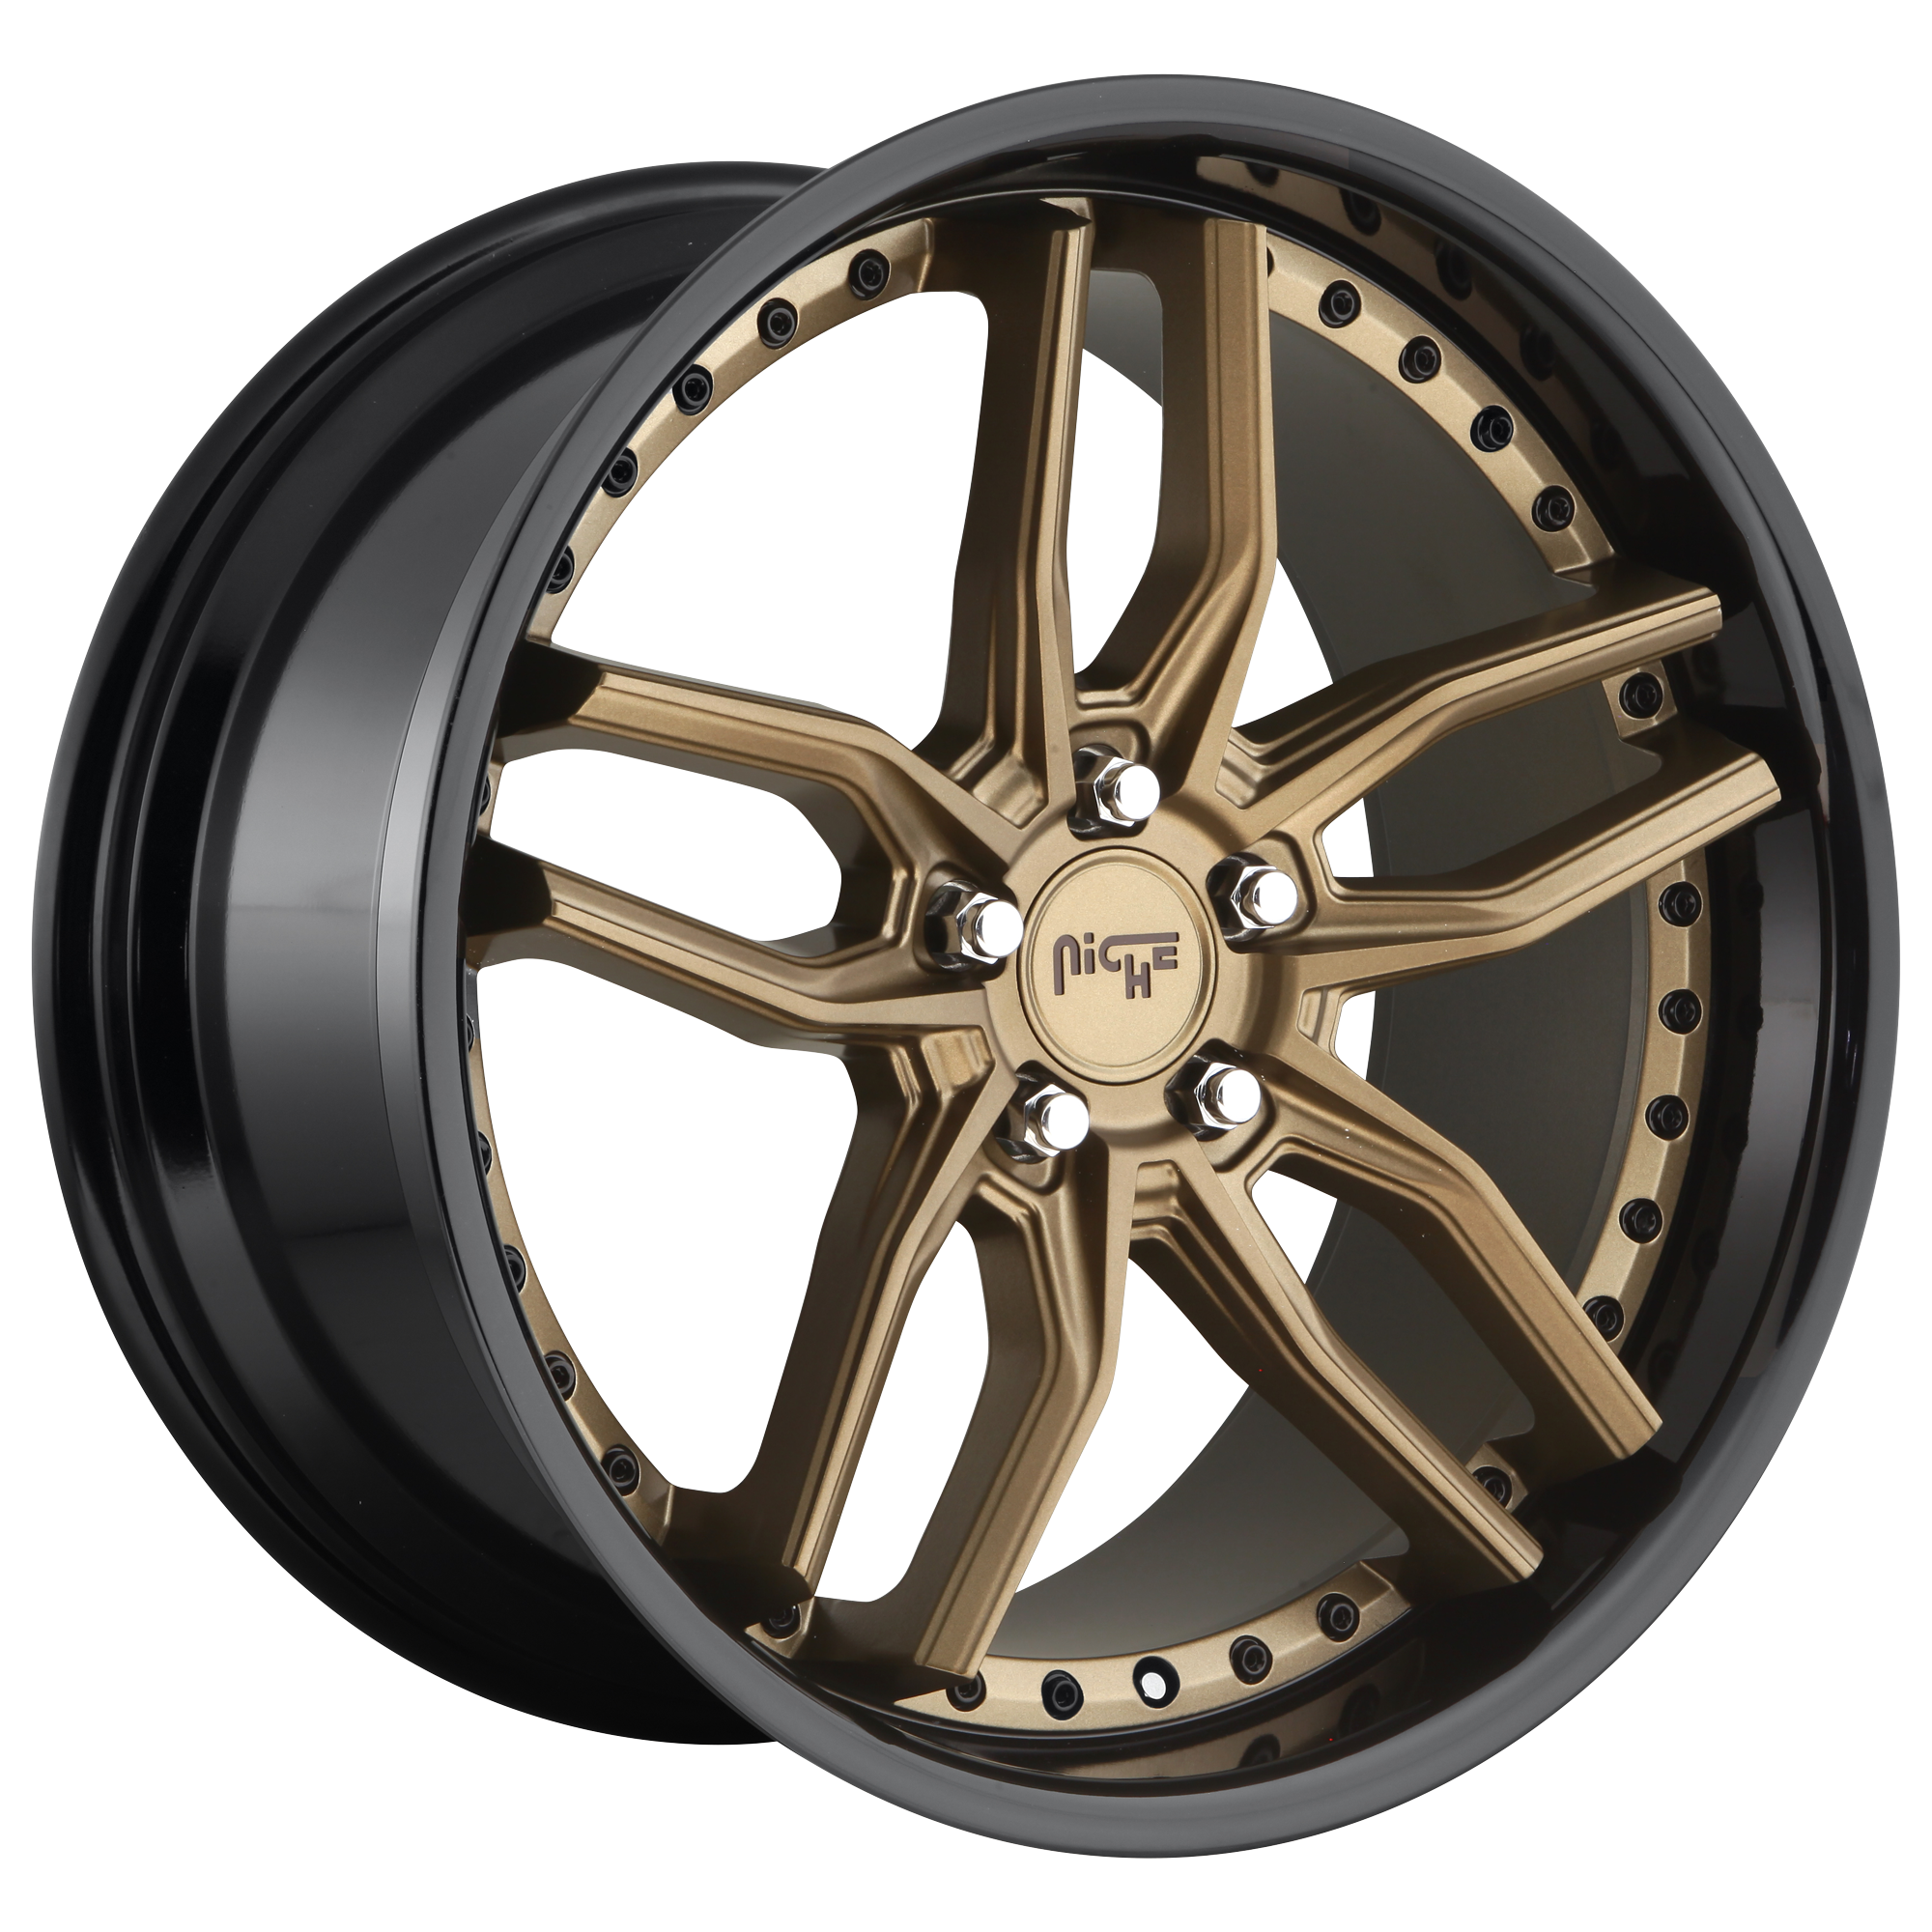 METHOS 20x10 5x112.00 MATTE BRONZE BLACK BEAD RING (40 mm) - Tires and Engine Performance